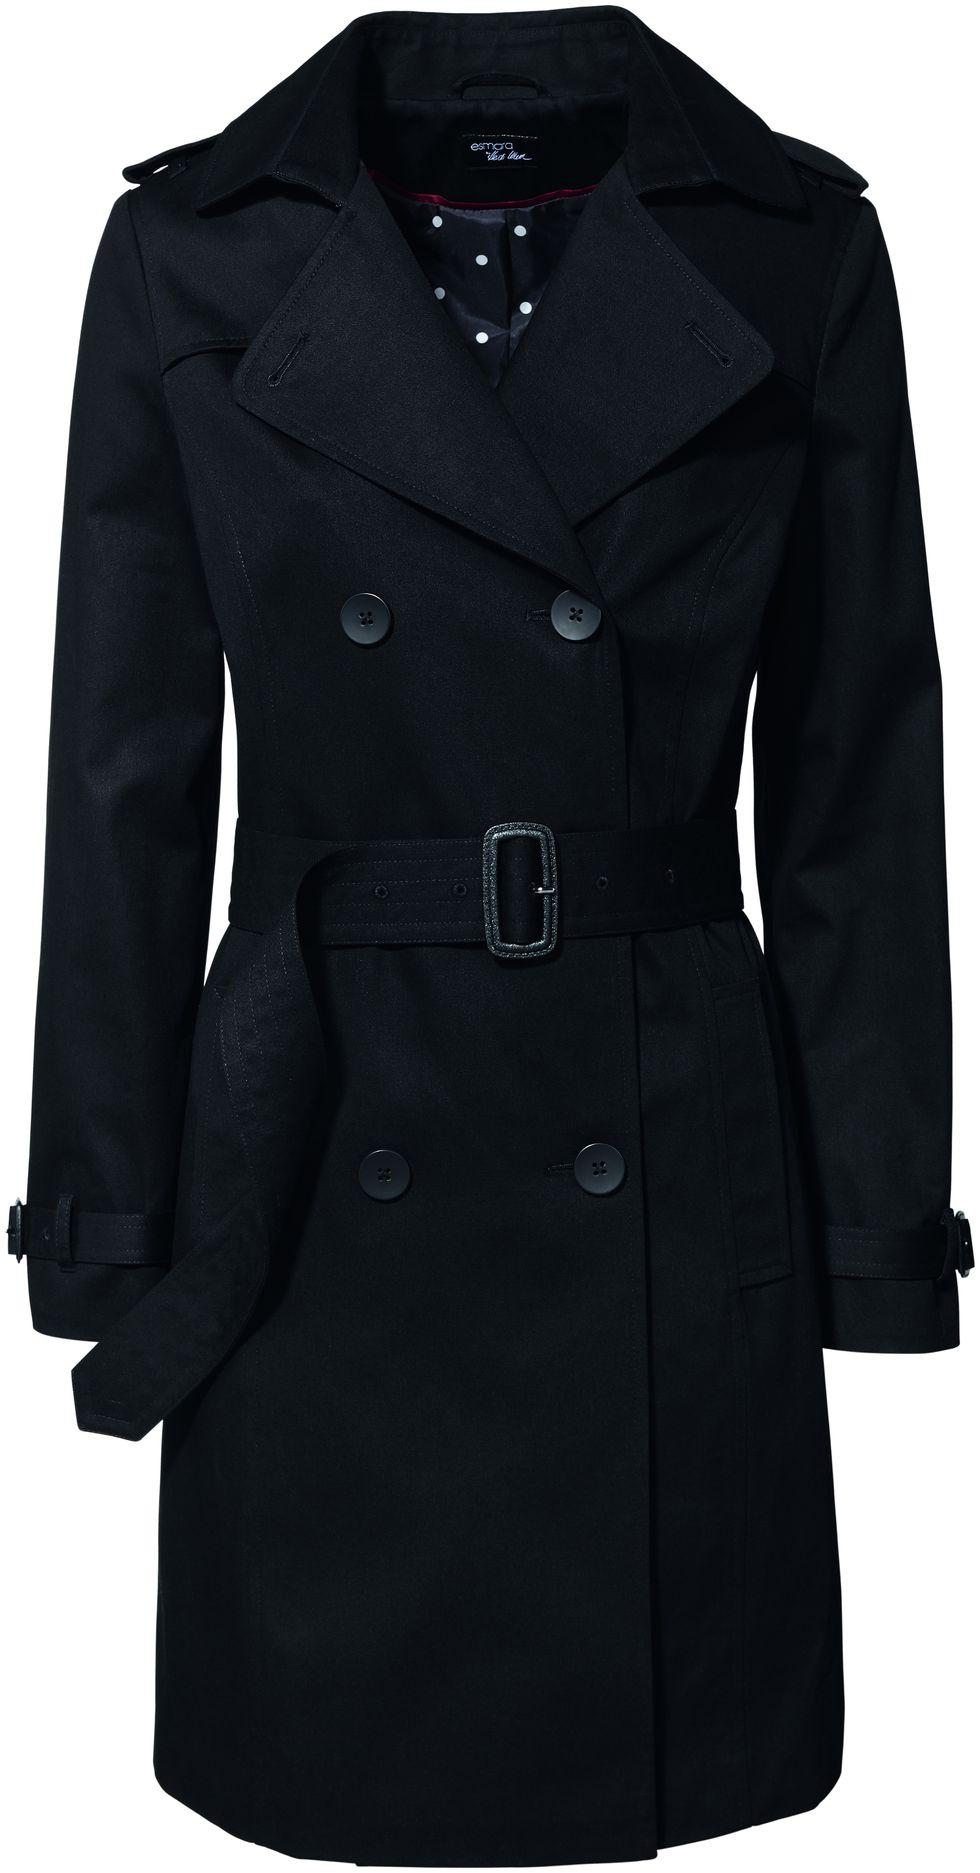 Clothing, Coat, Trench coat, Outerwear, Overcoat, Sleeve, Collar, Jacket, Button, 